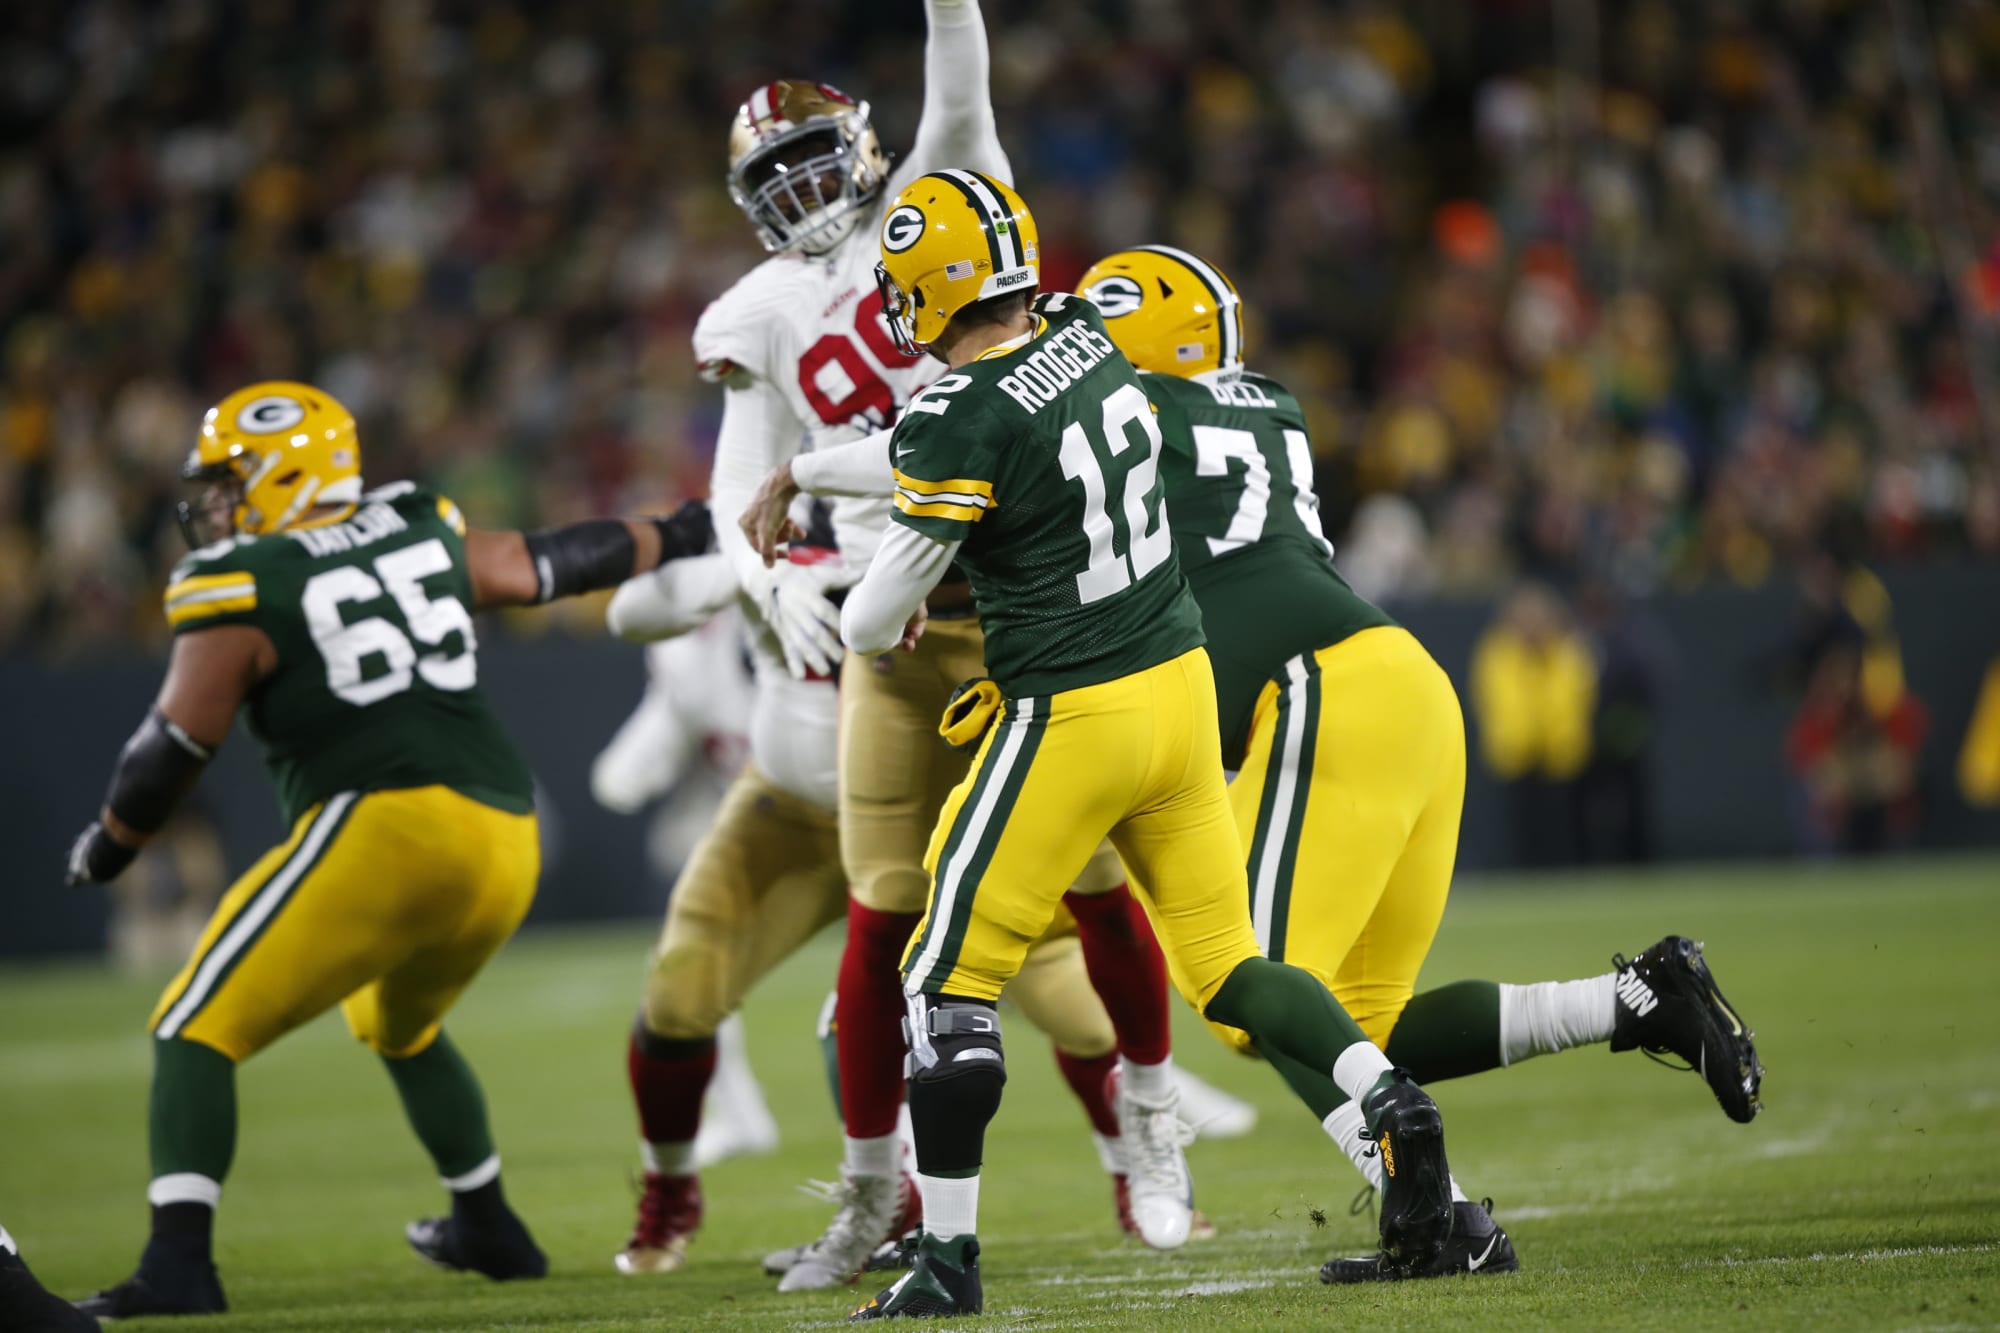 49ers should be happy to face Packers in divisional round of NFL playoffs